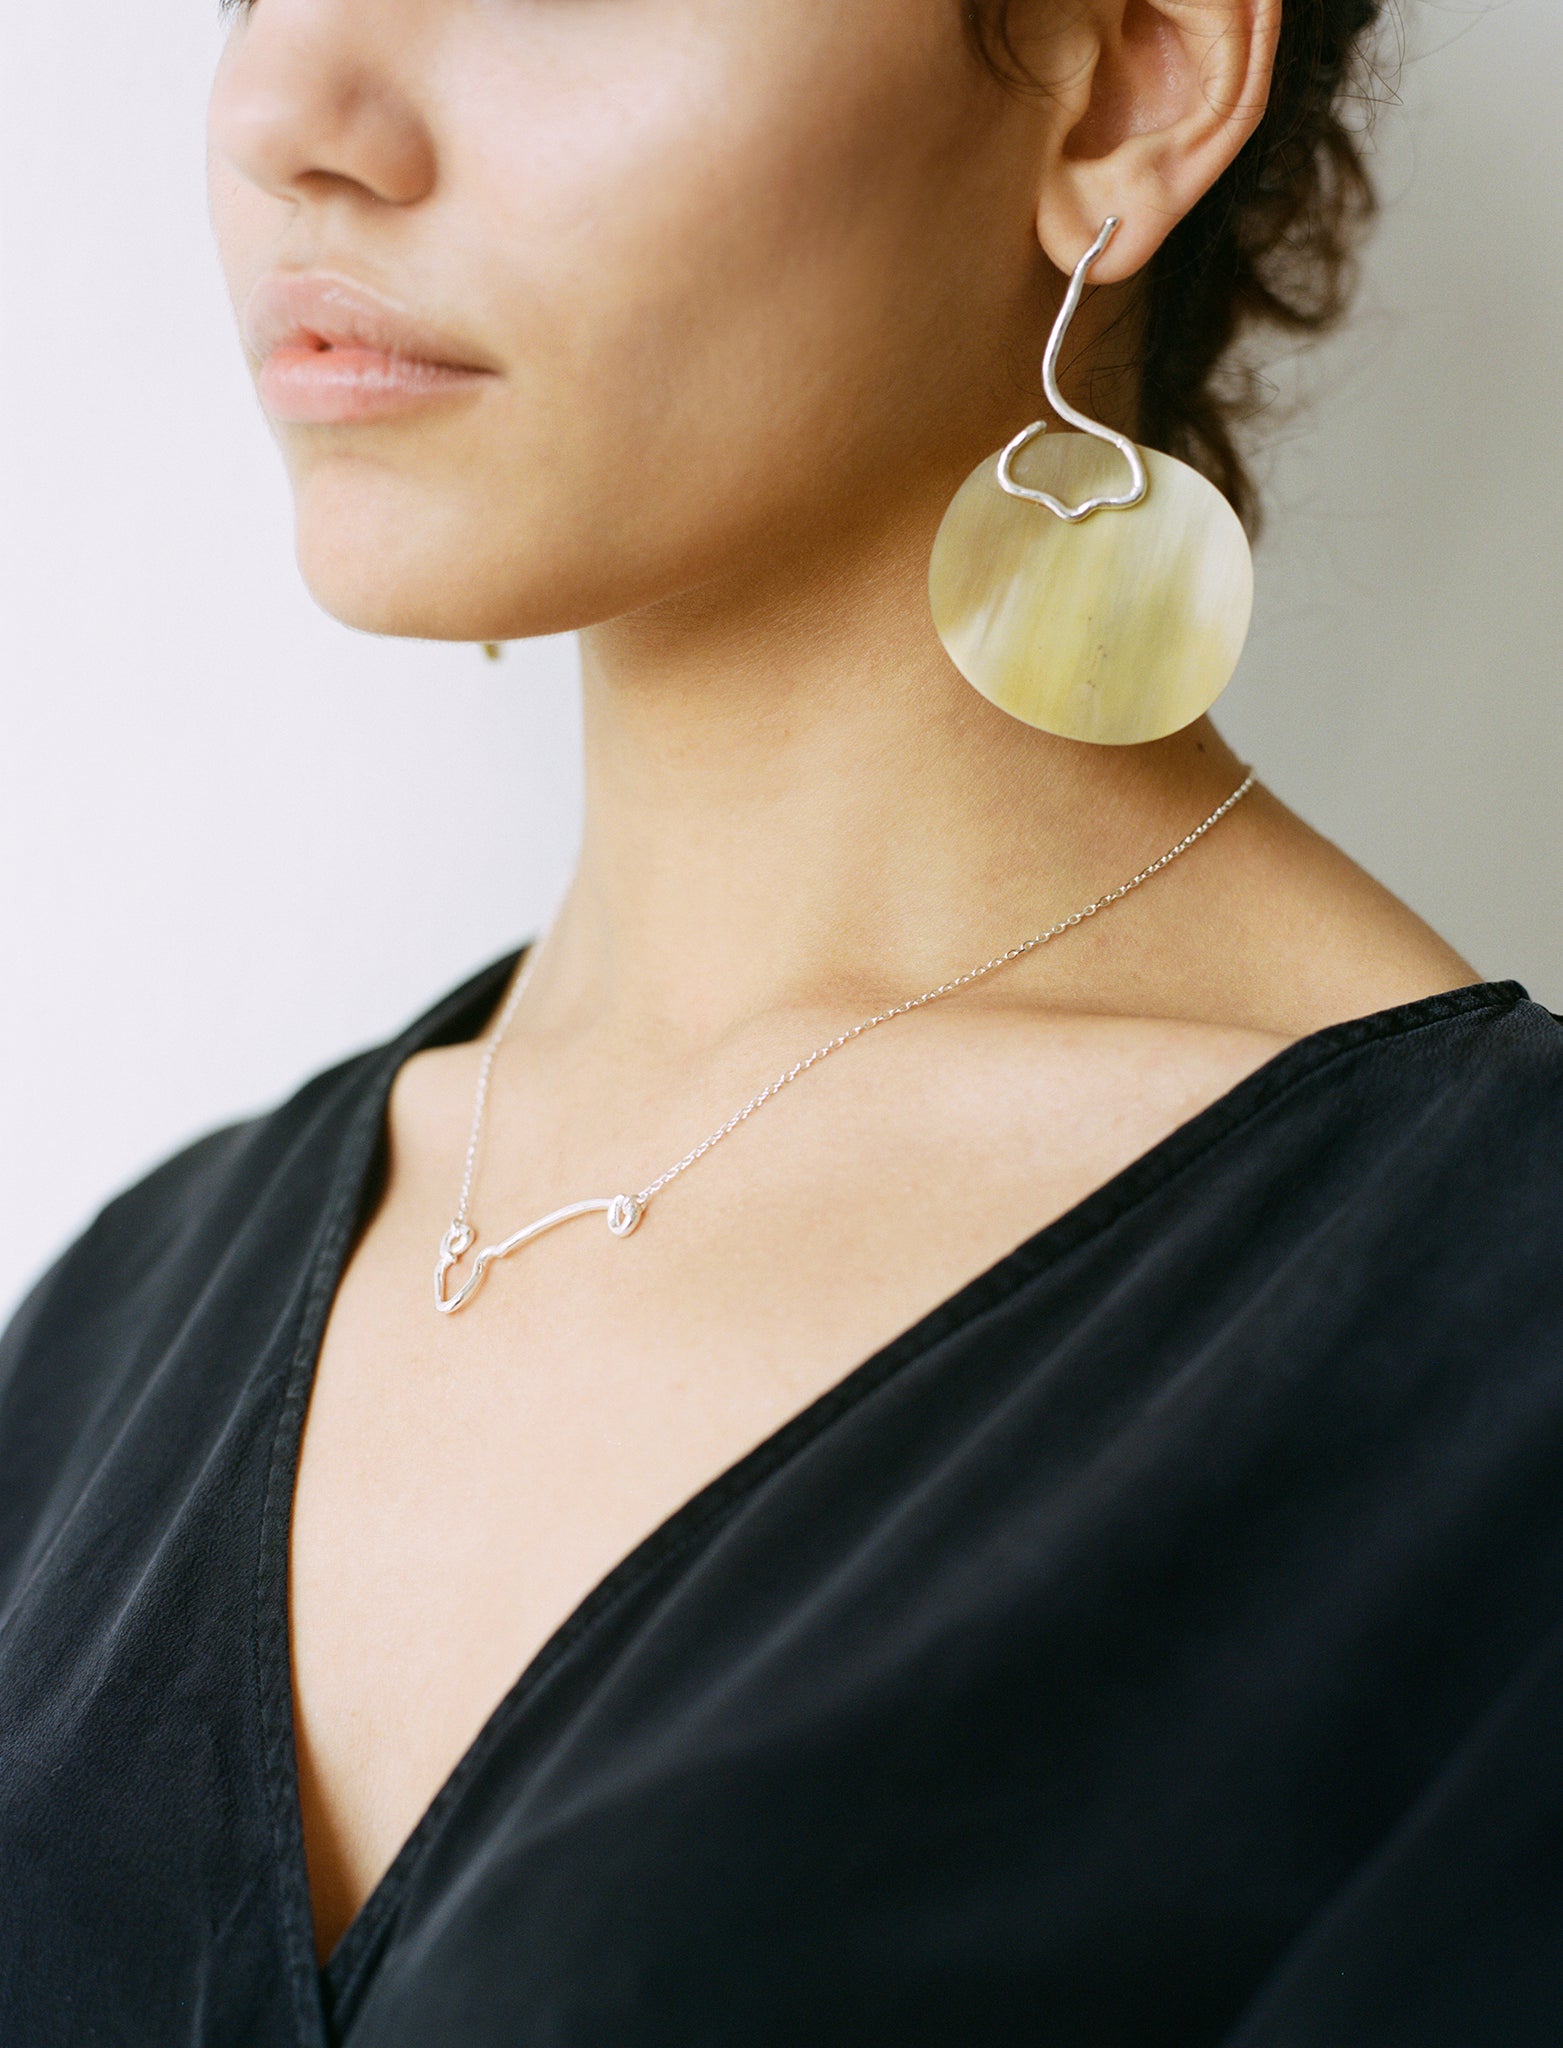 The IDA necklace is a sculptural elegant silver line necklace featuring organic texture ethically handmade in London from recycled silver by Folde Jewellery.